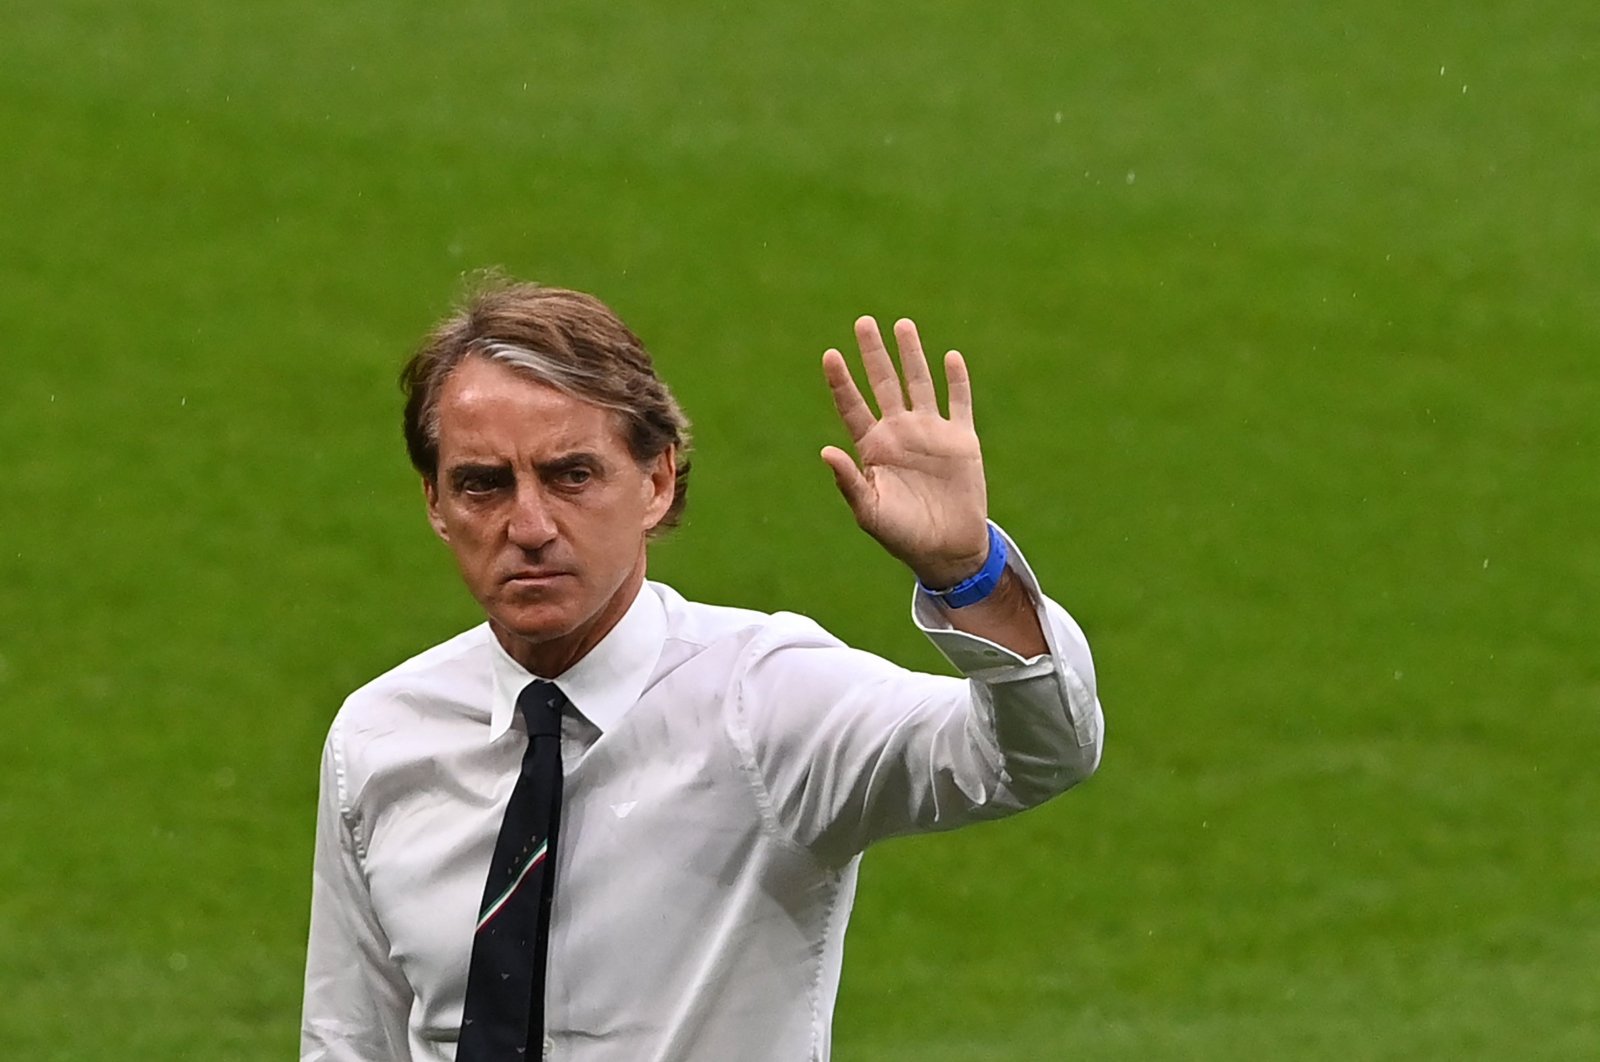 Then-Italy coach Roberto Mancini greets supporters ahead of the UEFA EURO 2020 final against England, London, U.K., July 11, 2021. (AFP Photo)